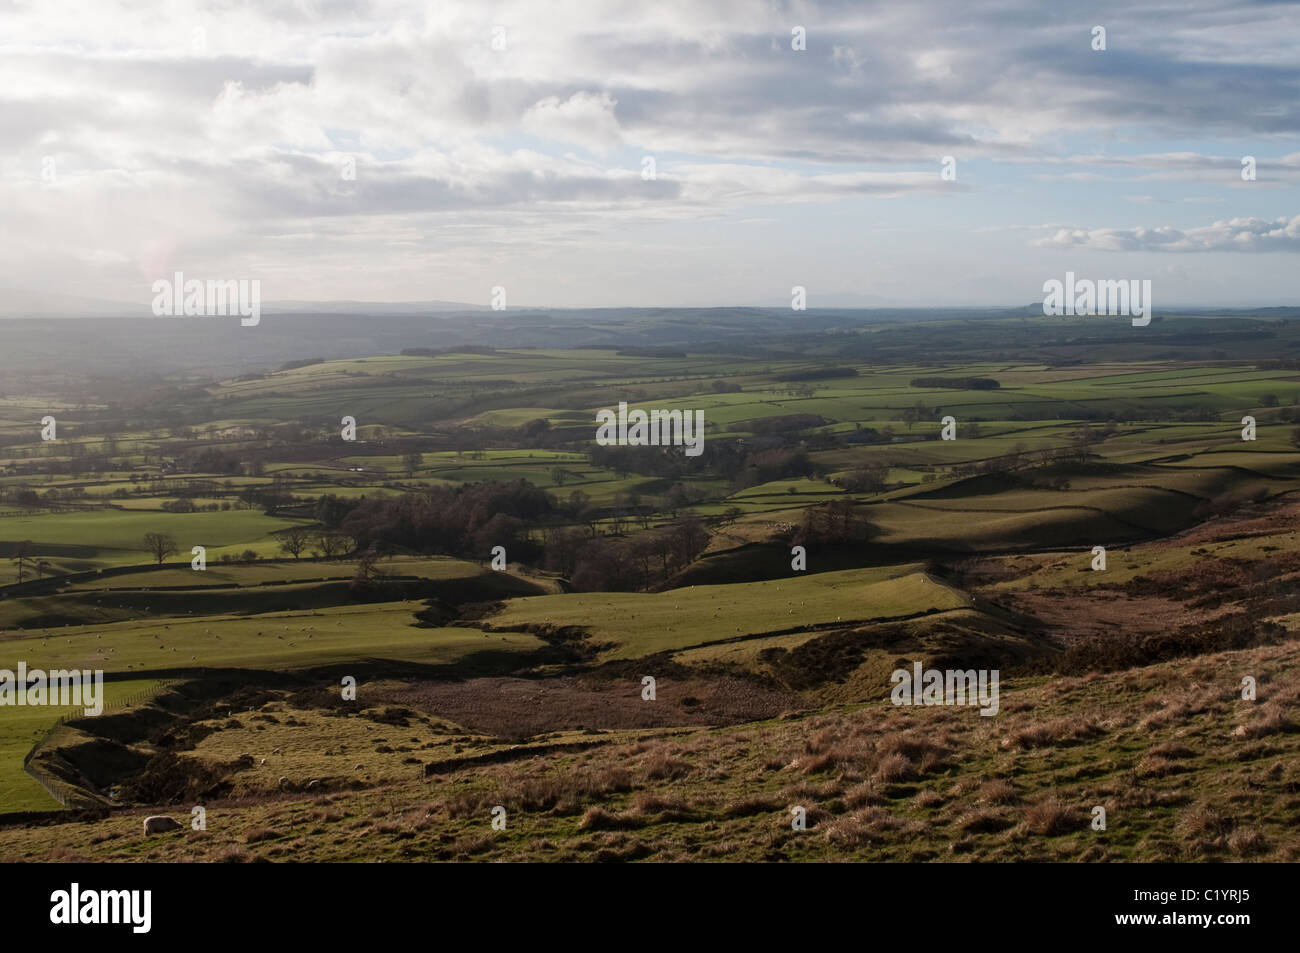 A view facing West from the Hartside Pass along the A686 between Alston and Penrith in Cumbria, England. Stock Photo